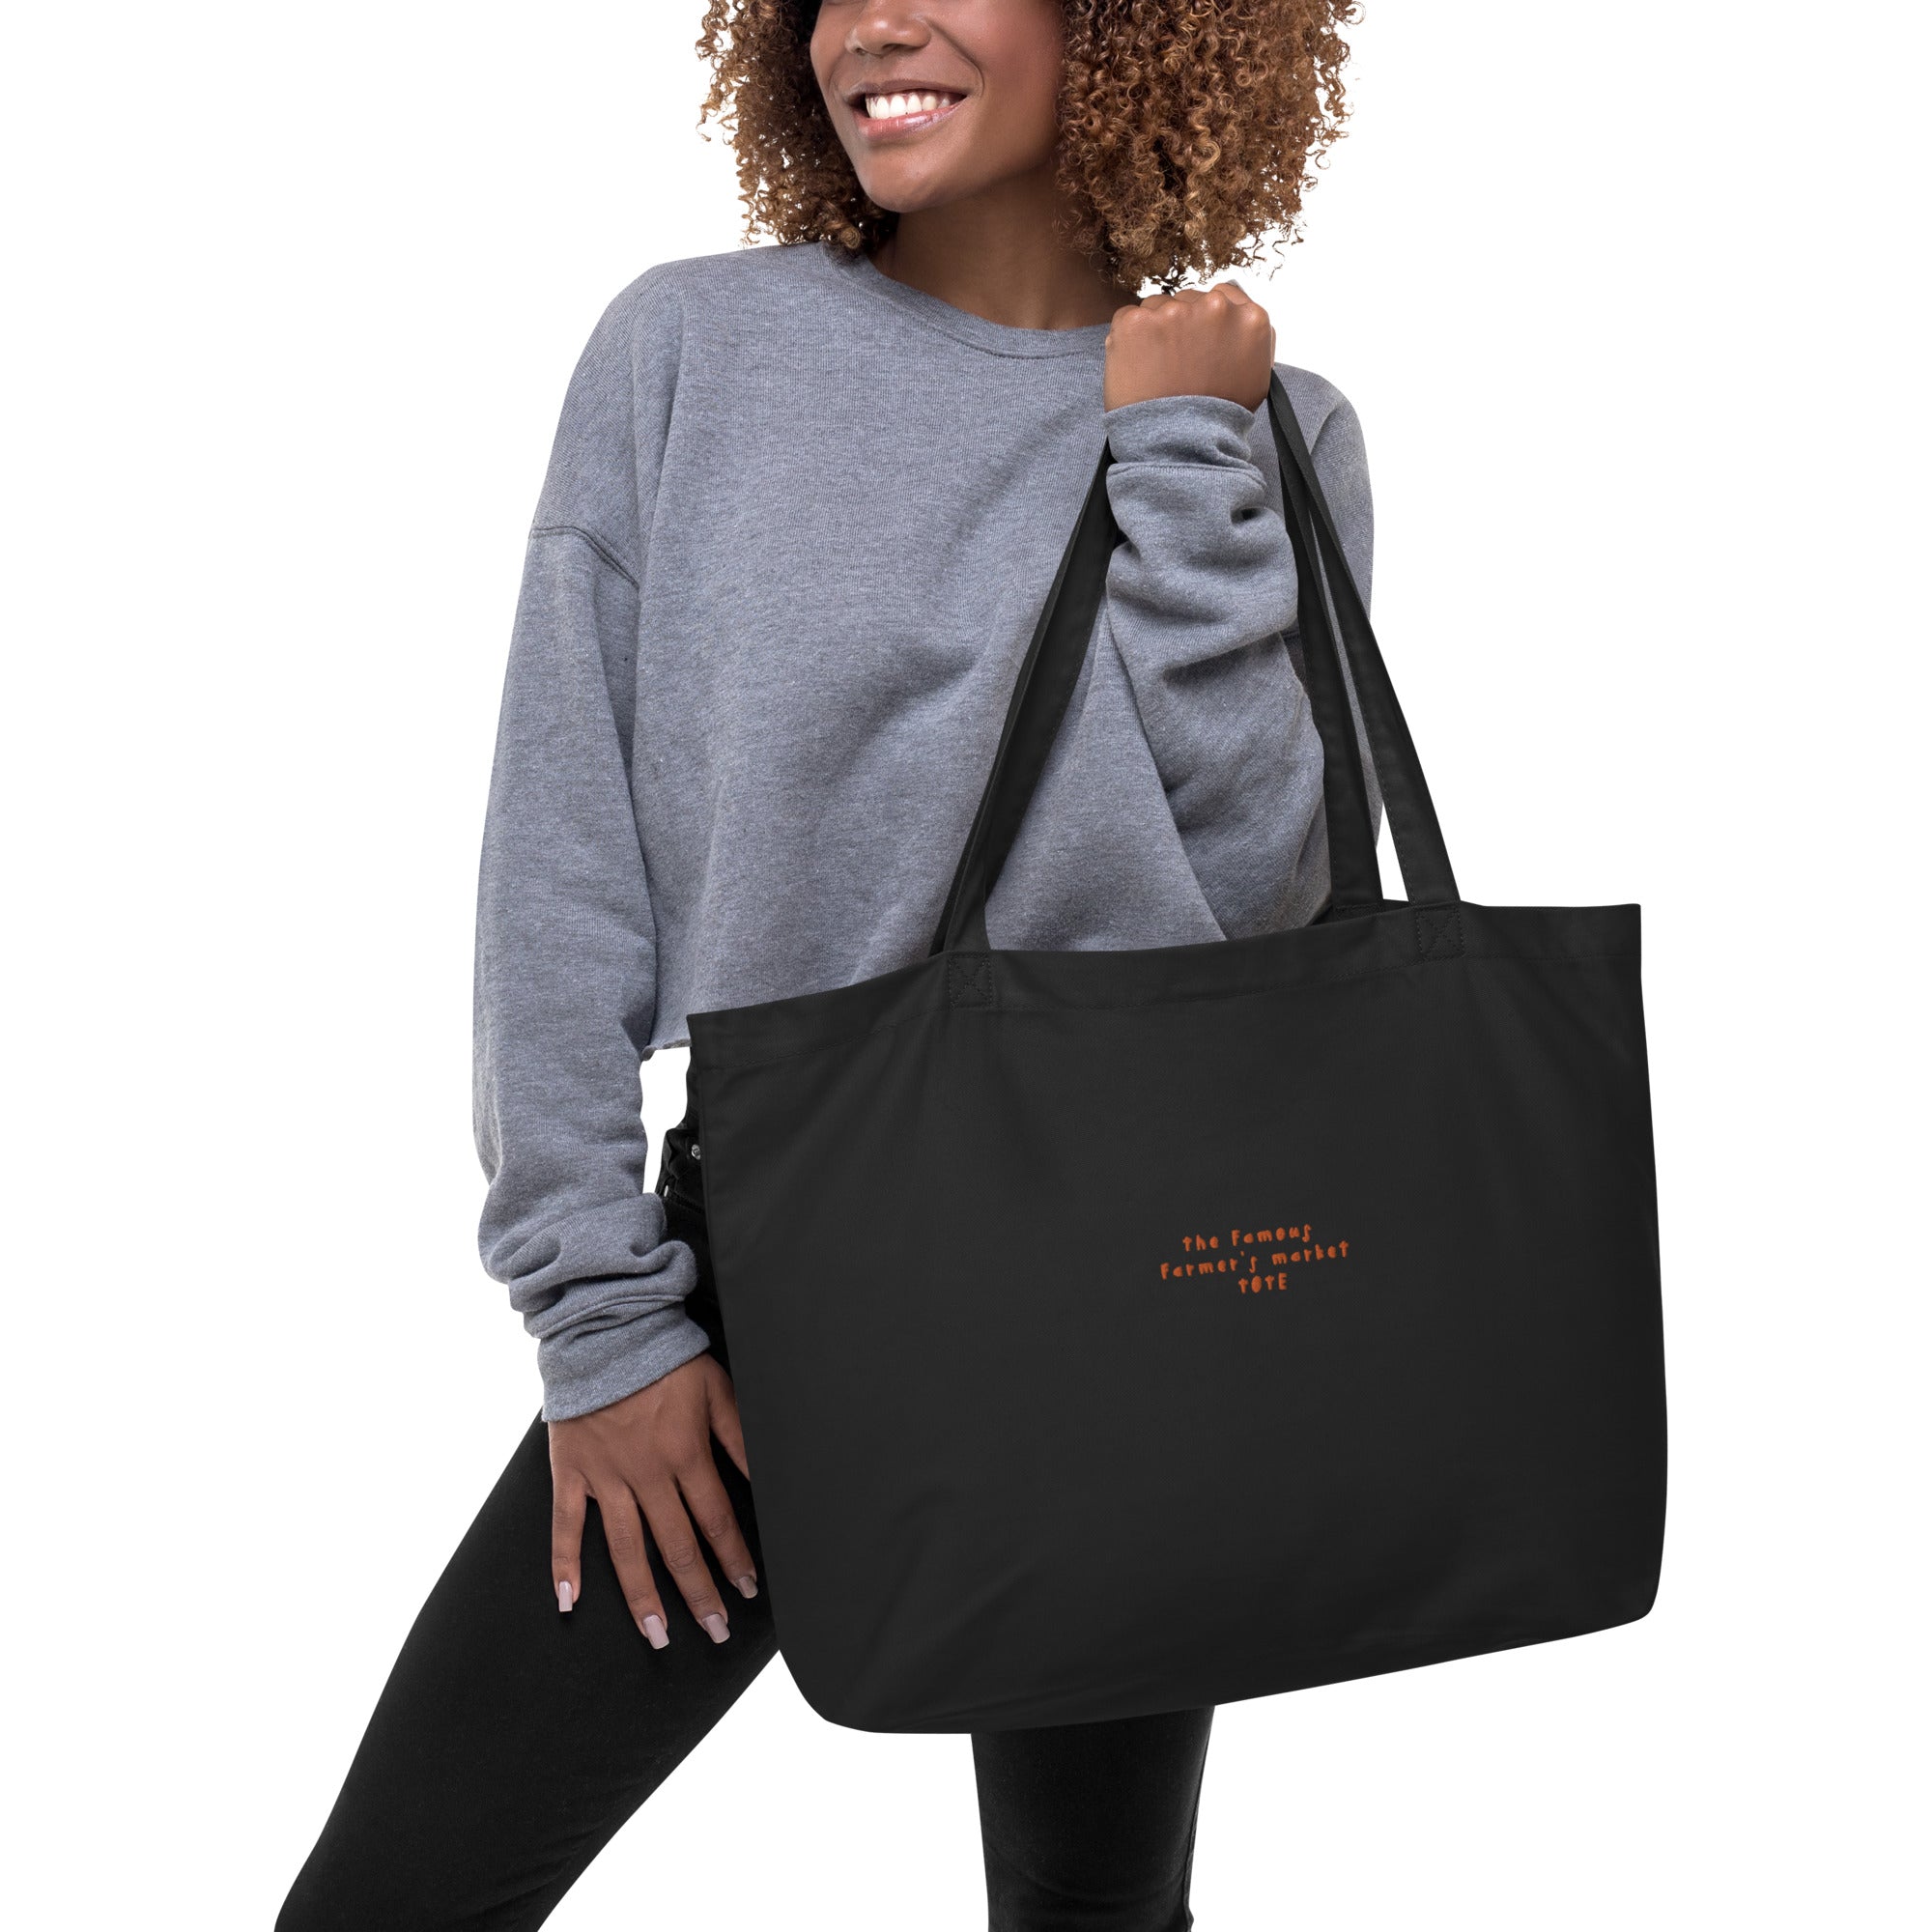 Famer's Market Eco Tote - Embroided